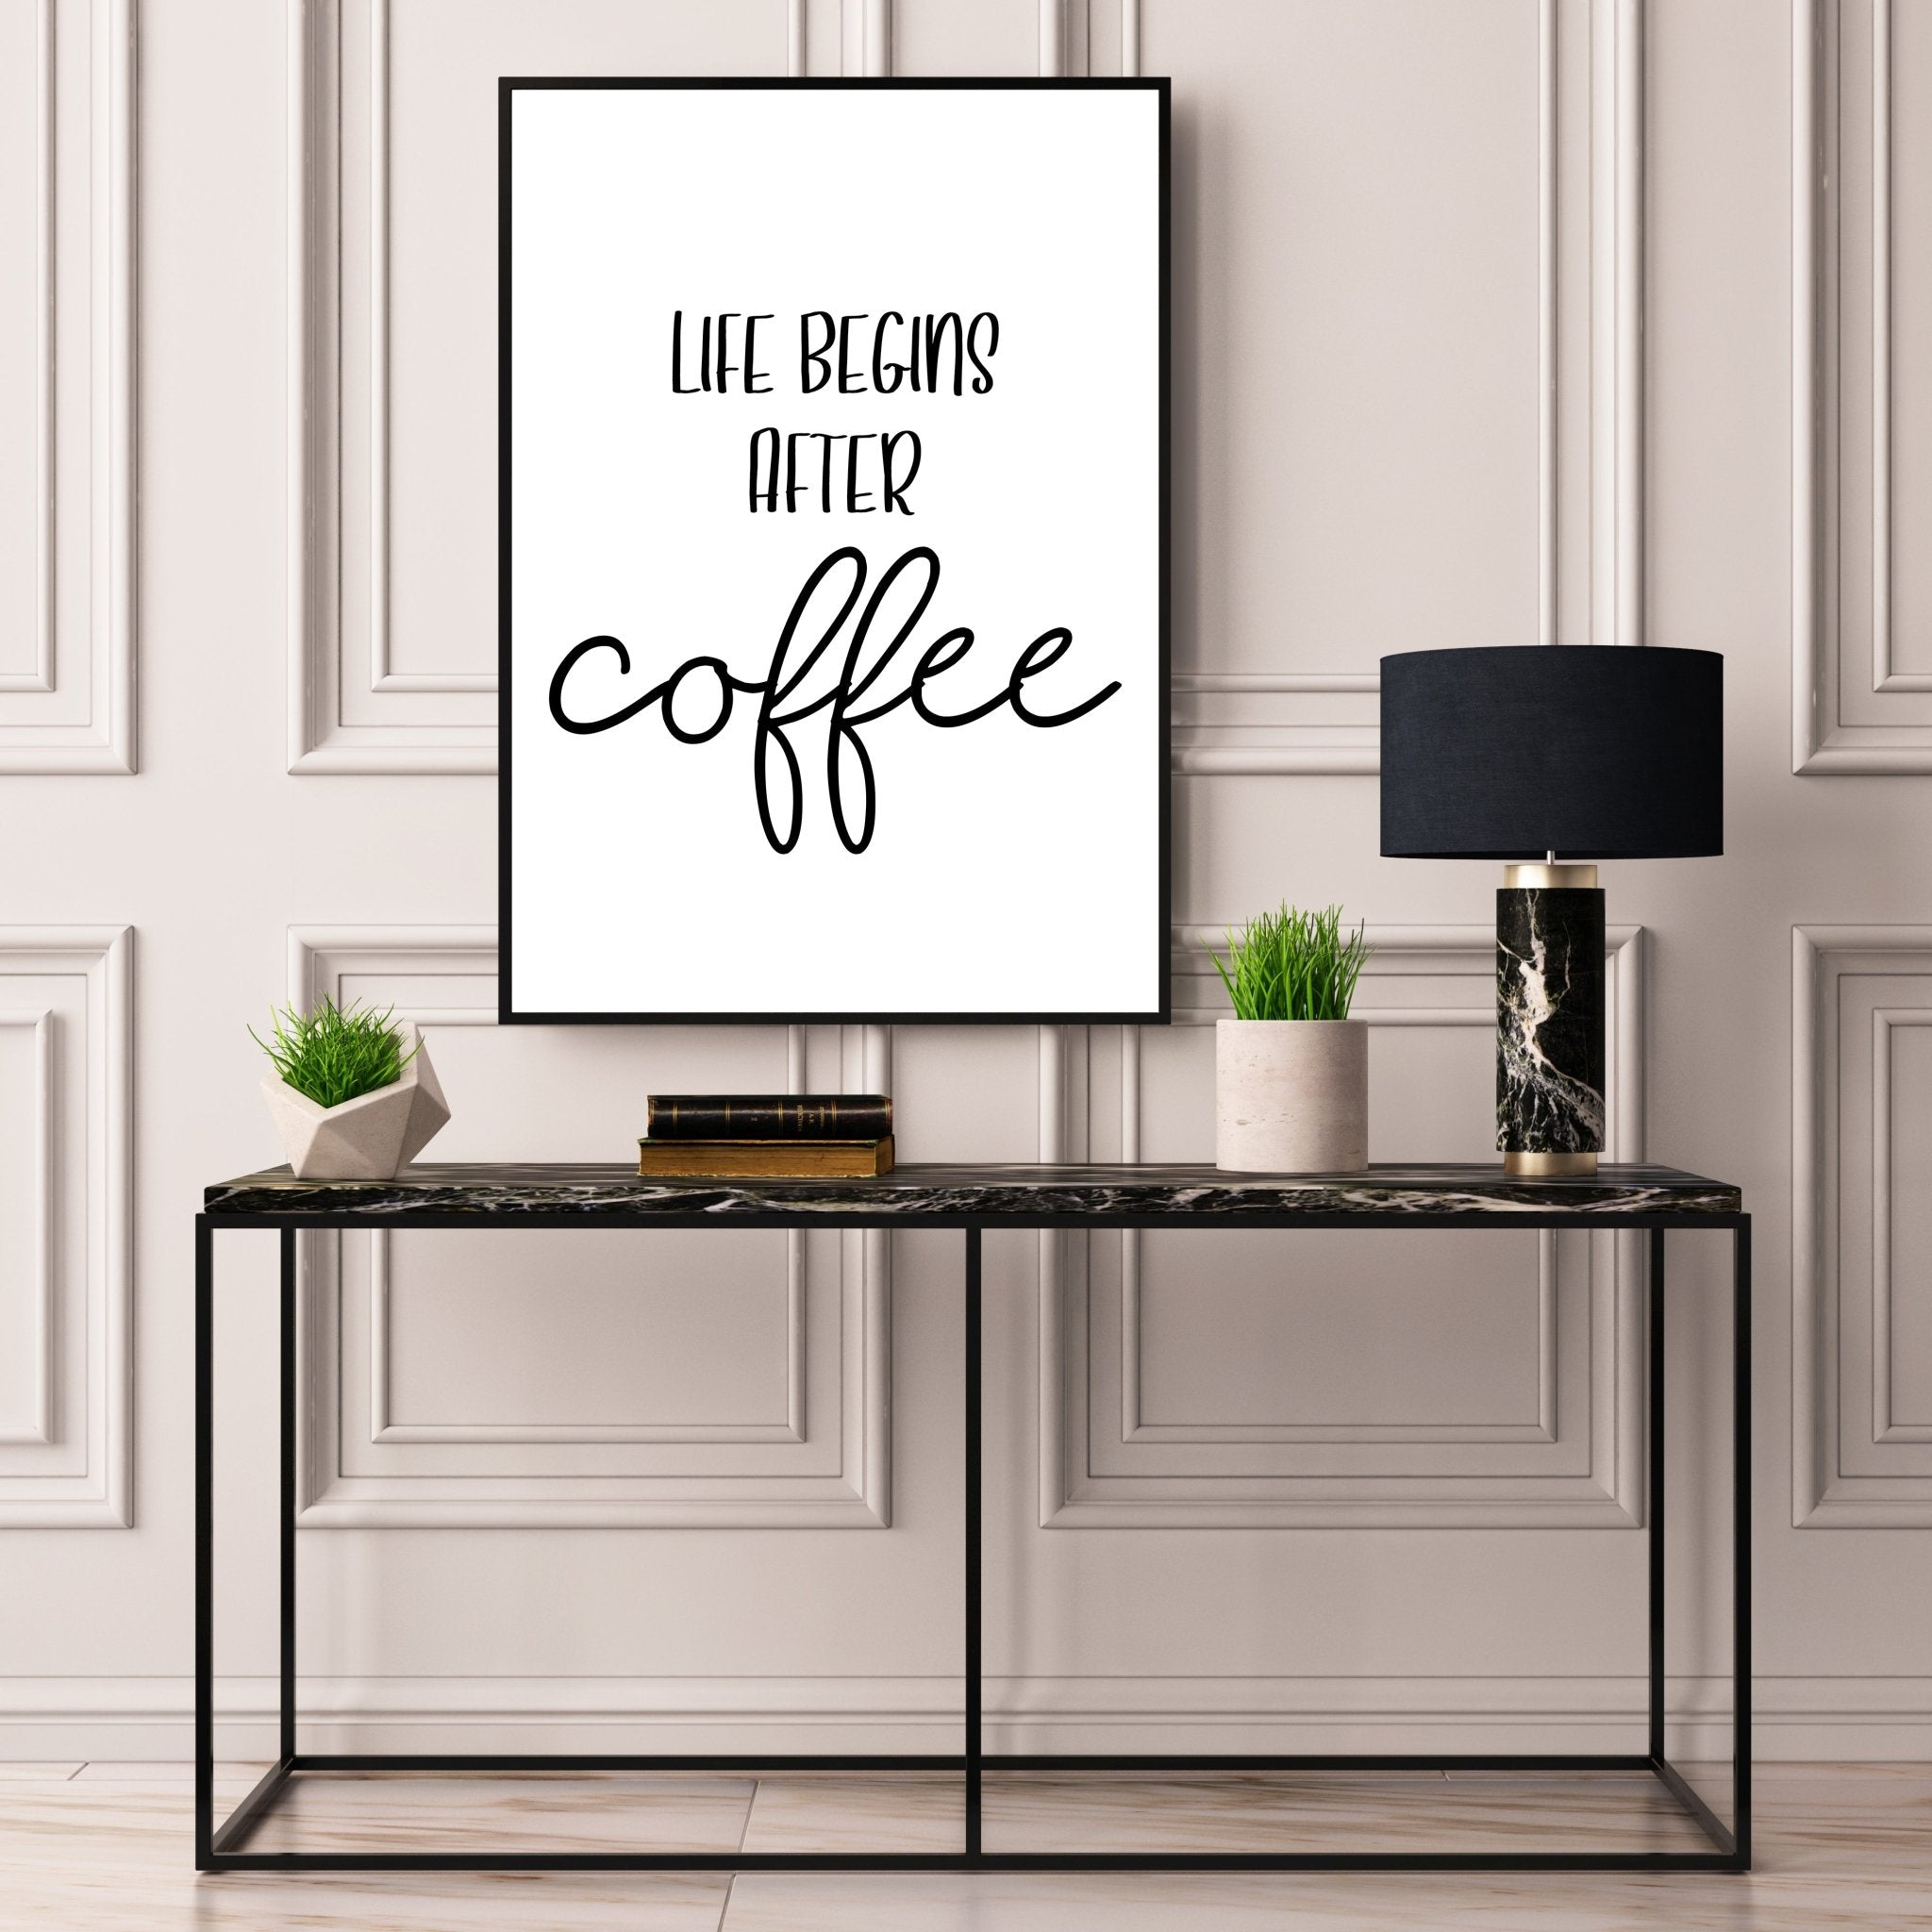 Life Begins After Coffee - D'Luxe Prints